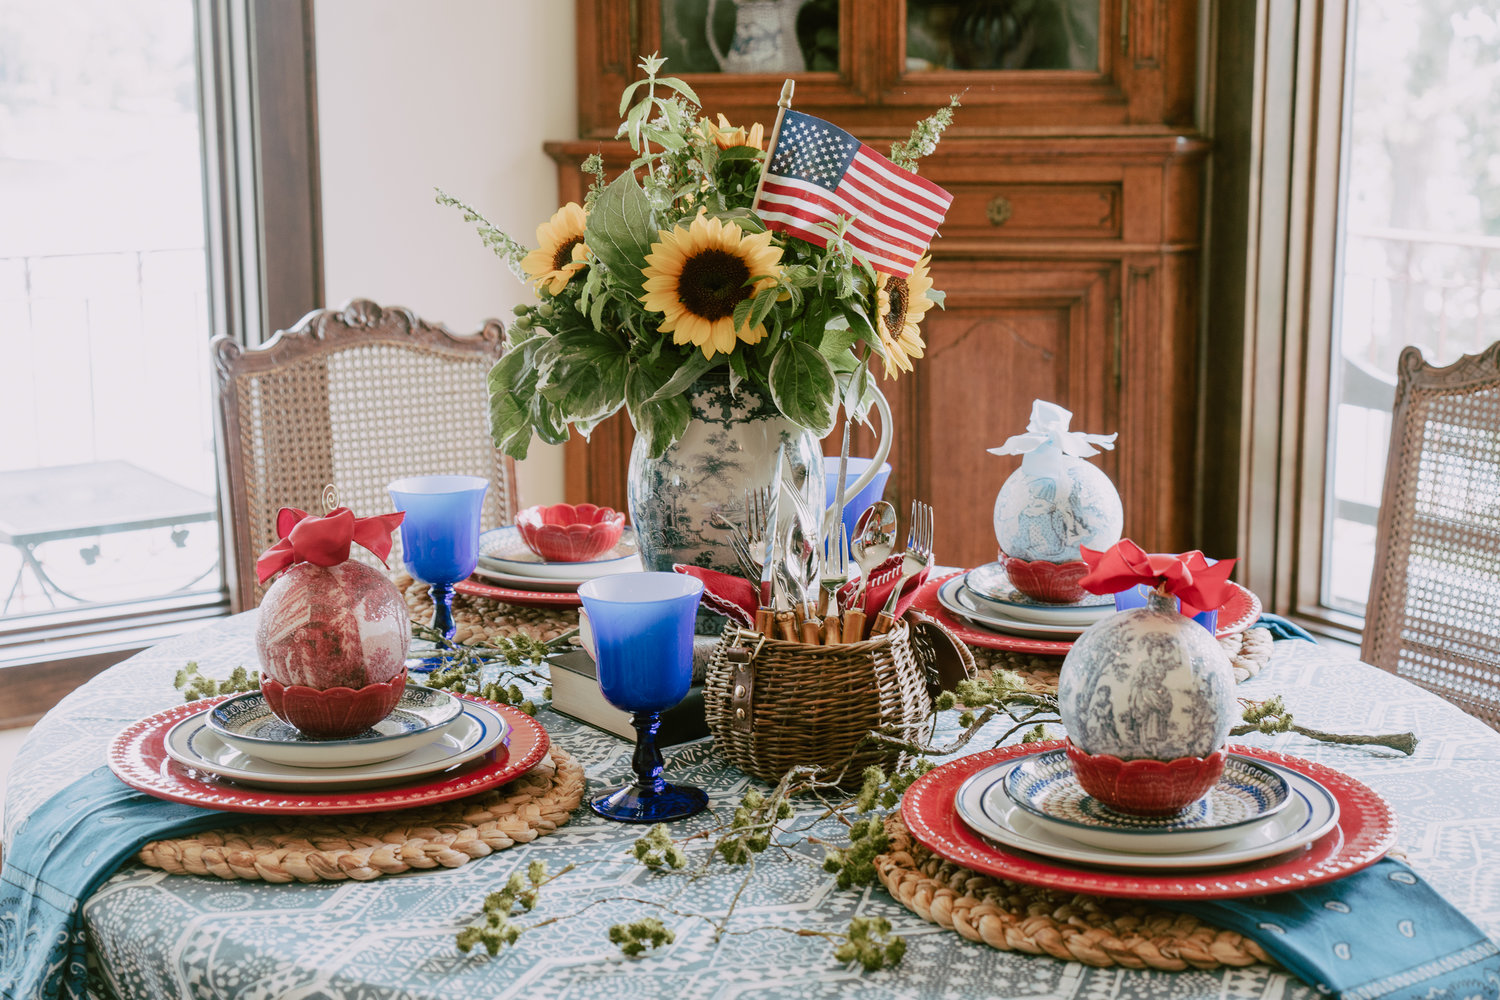 The blue toile pitcher from Nell Hills is the perfect centerpiece with sunflowers for the 4th. Flowers by The Little Flower Shop.